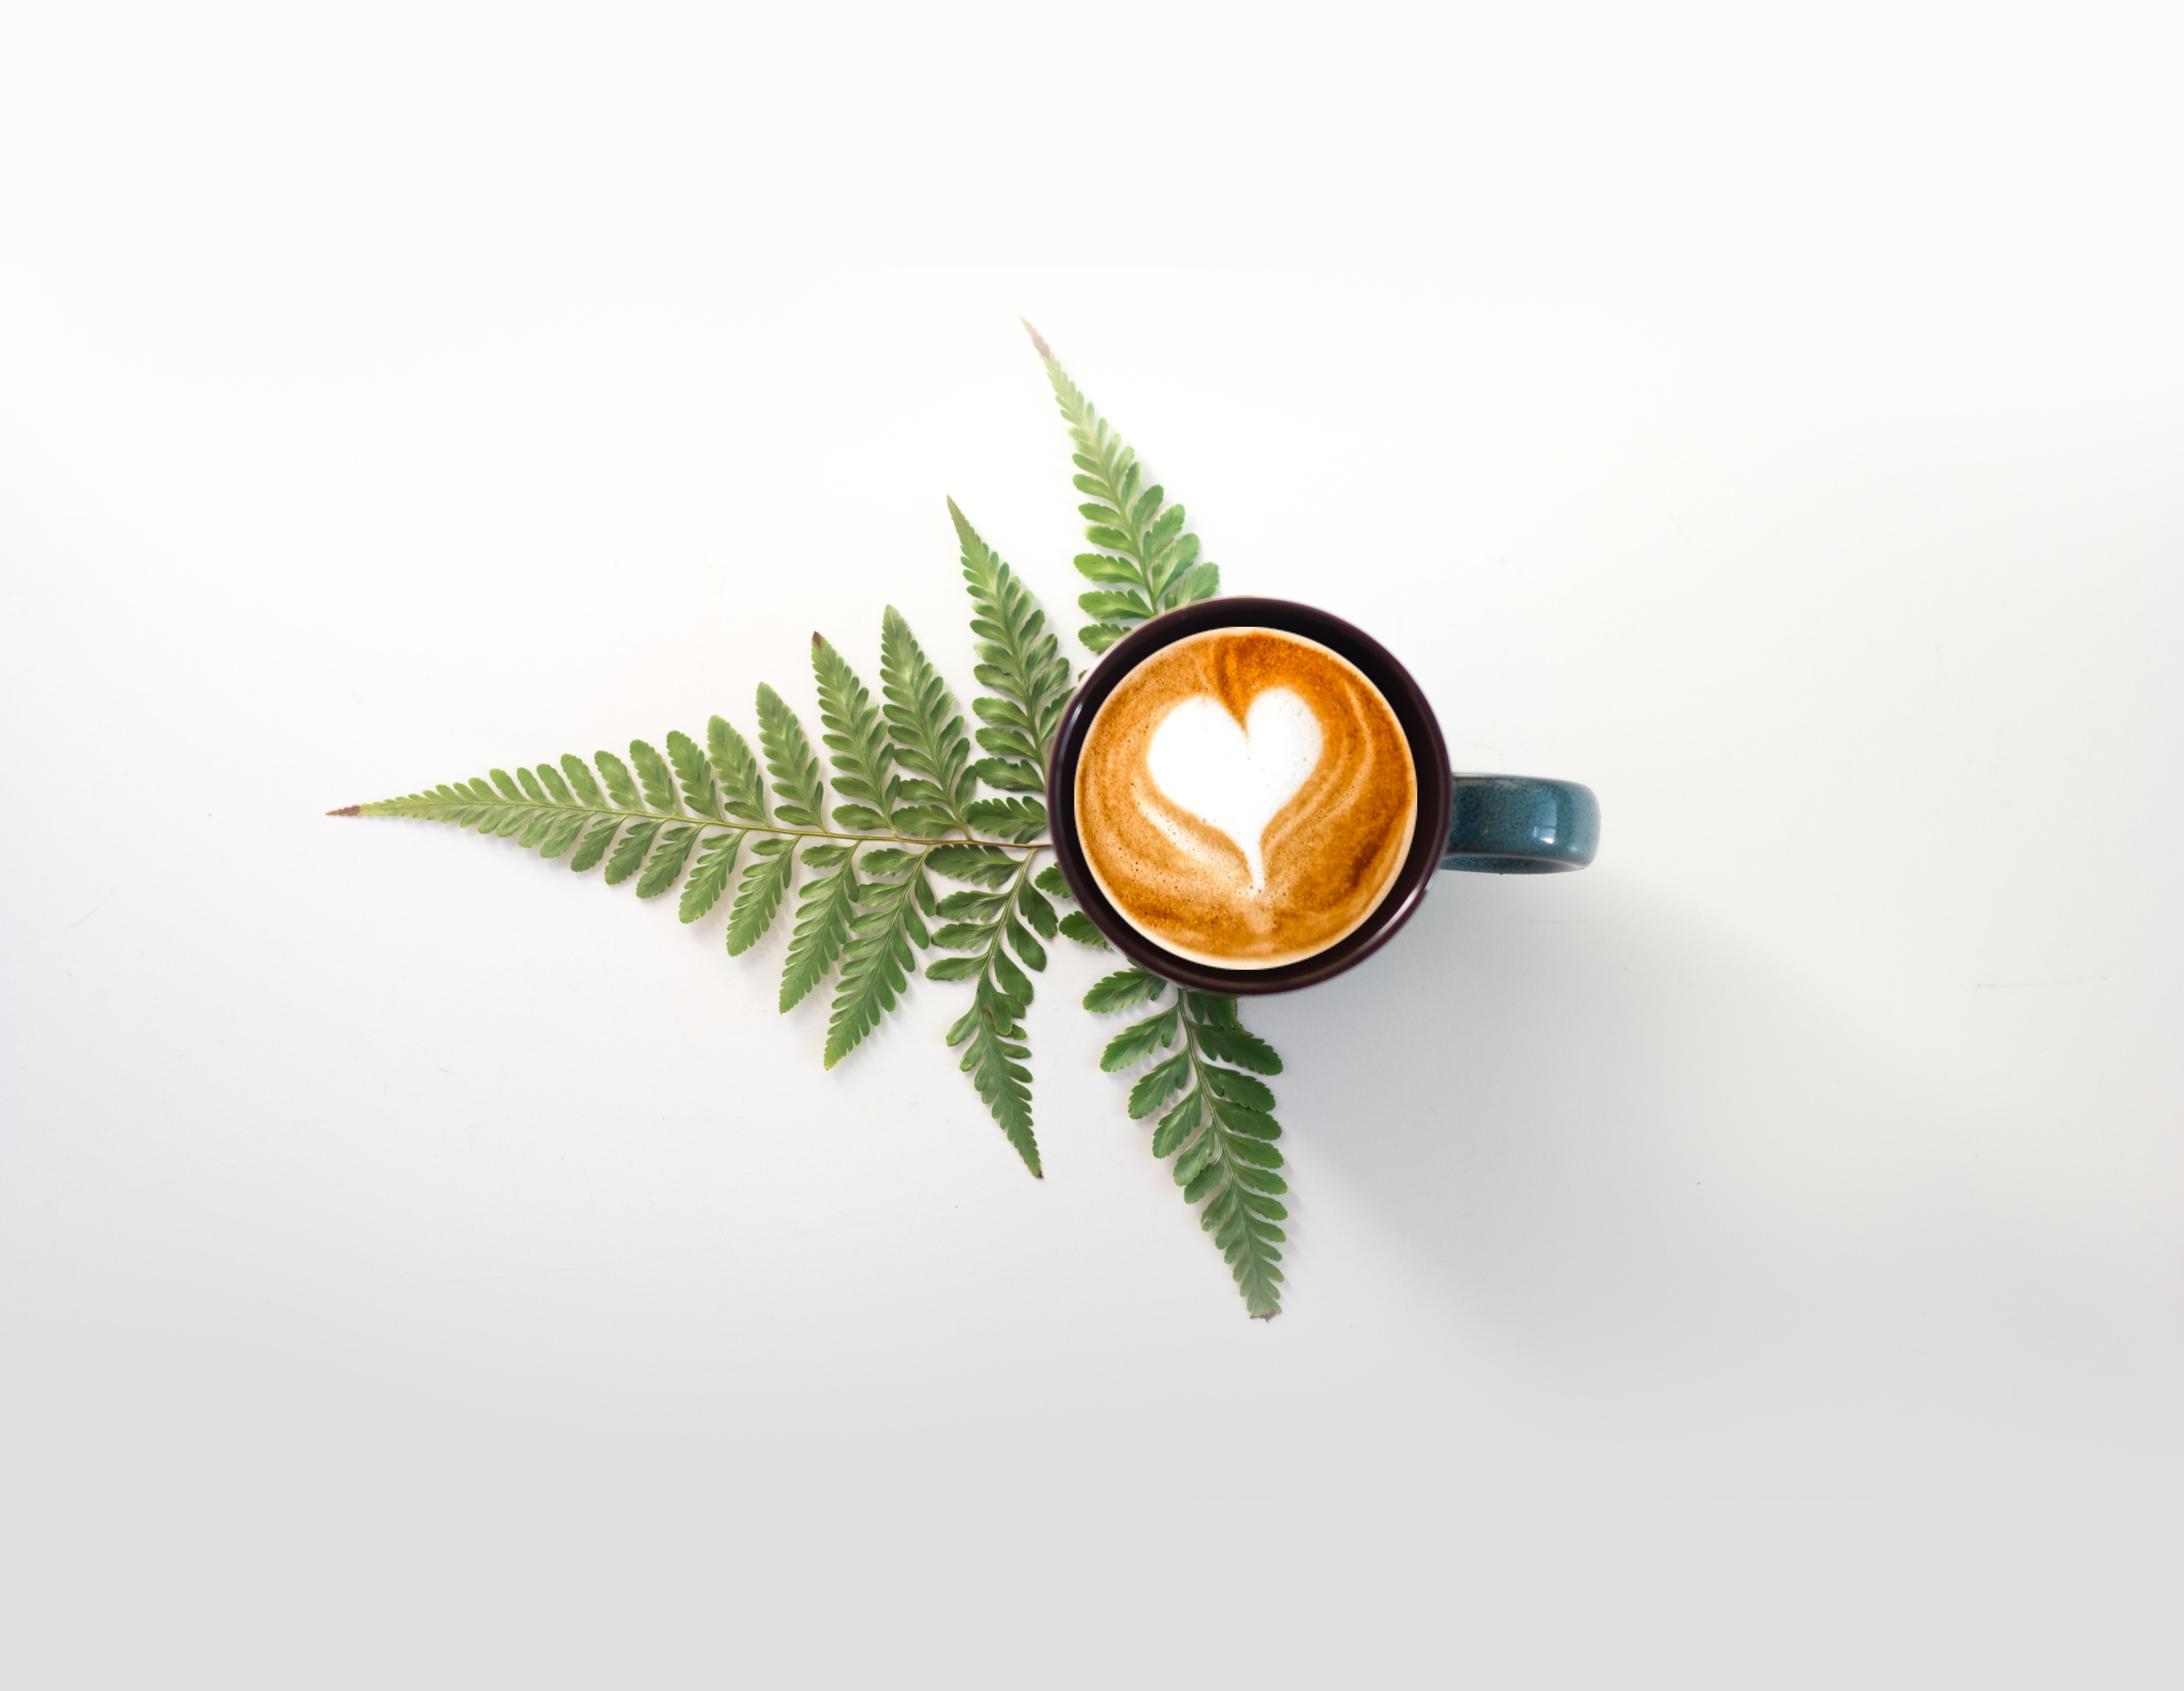 cup, beverage, food, fern, pattern, cappuccino, drink